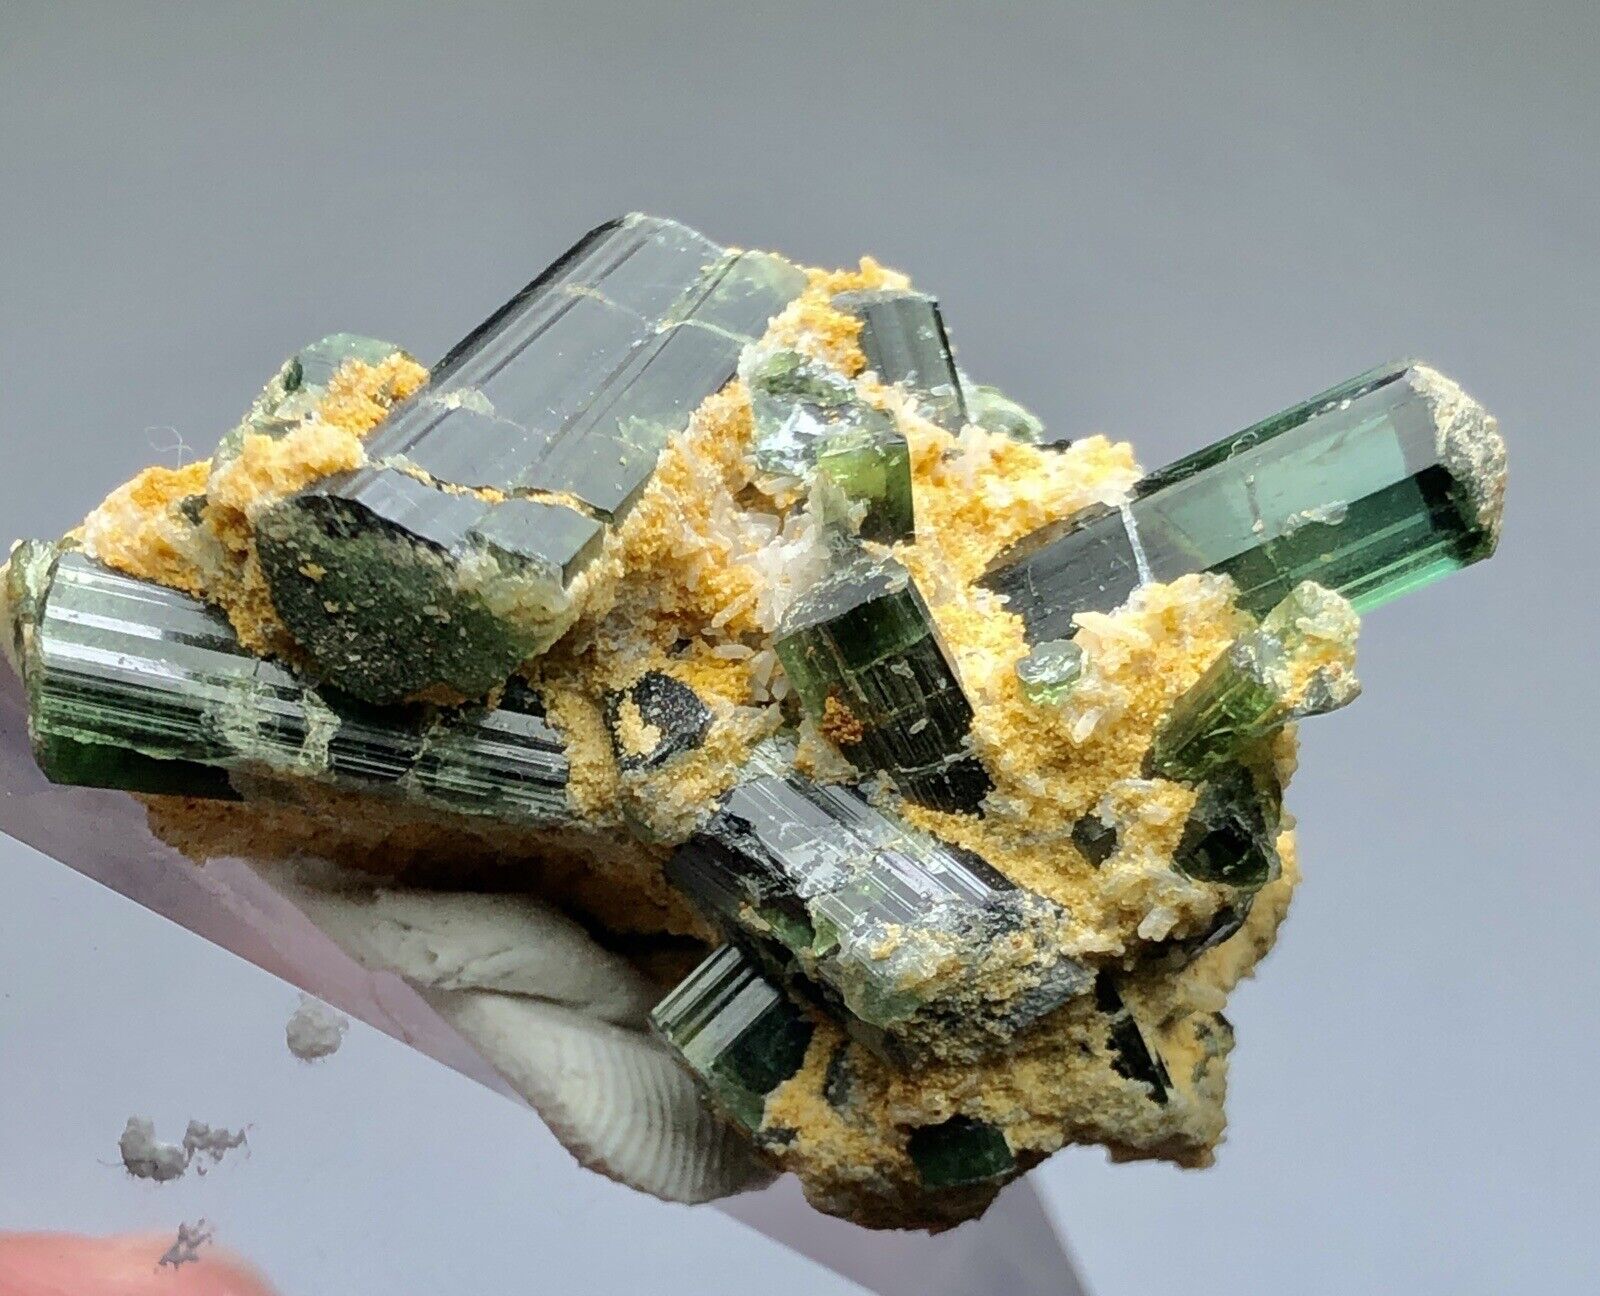 94 Ct Tourmaline Specimen  From Afghanistan